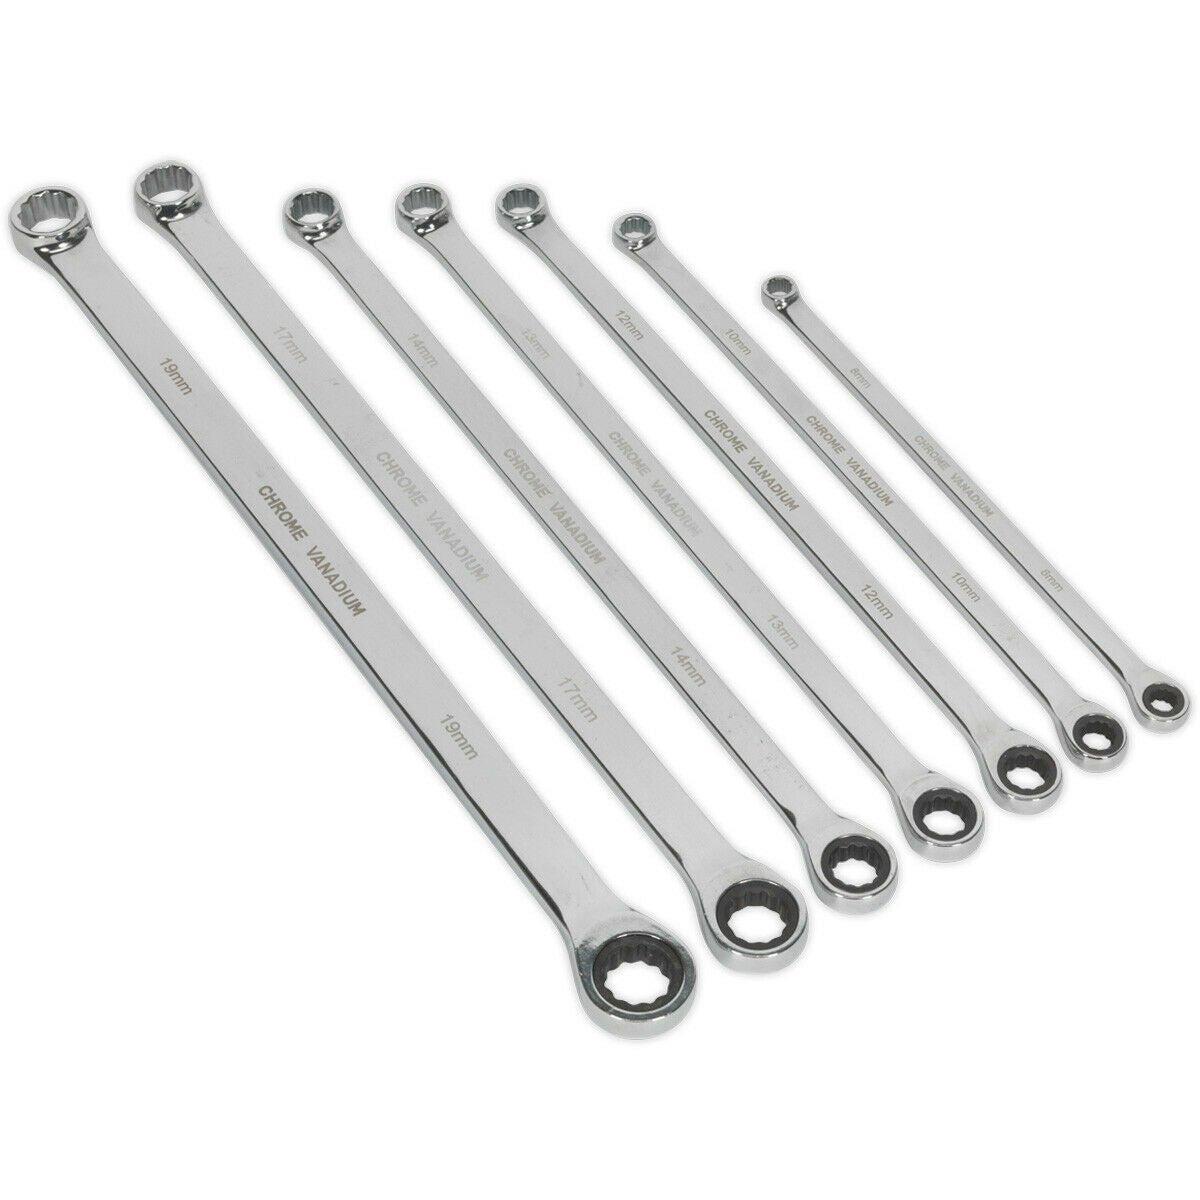 7pc Double Ended Fixed & Ratchet Ring Spanner Set -12 Point Metric Socket Wrench